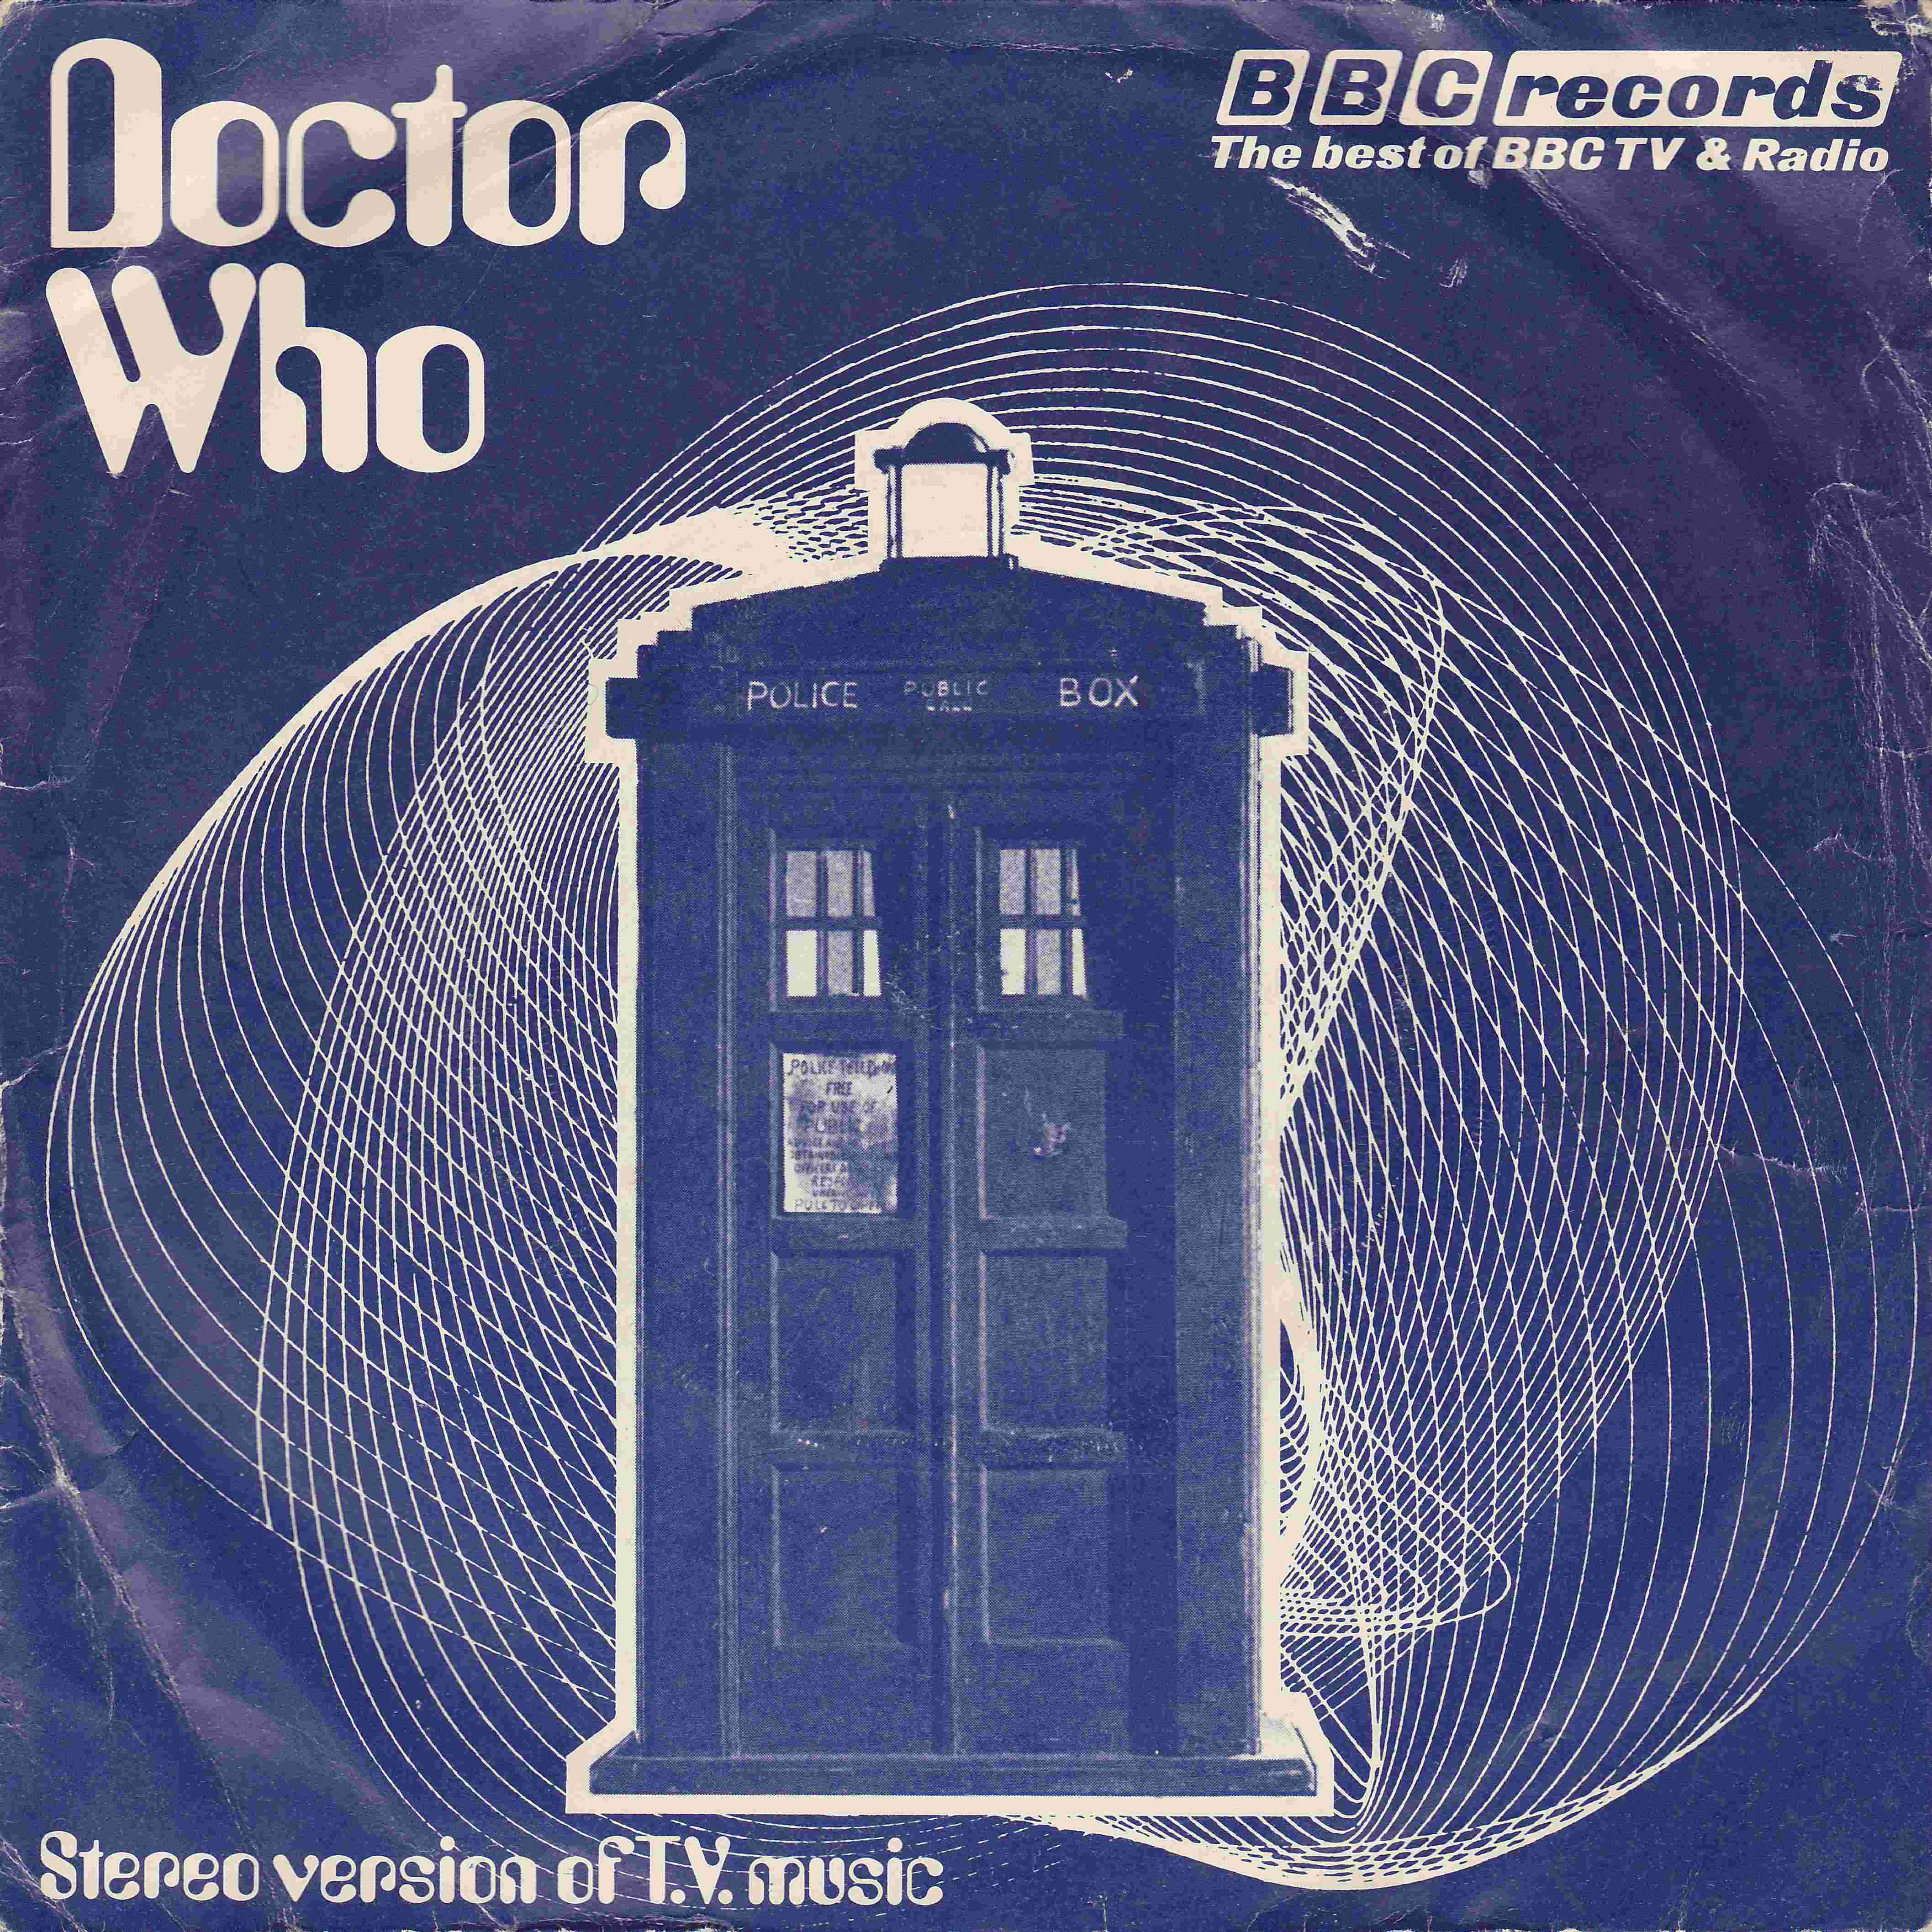 Picture of Doctor Who by artist Ron Grainer from the BBC singles - Records and Tapes library